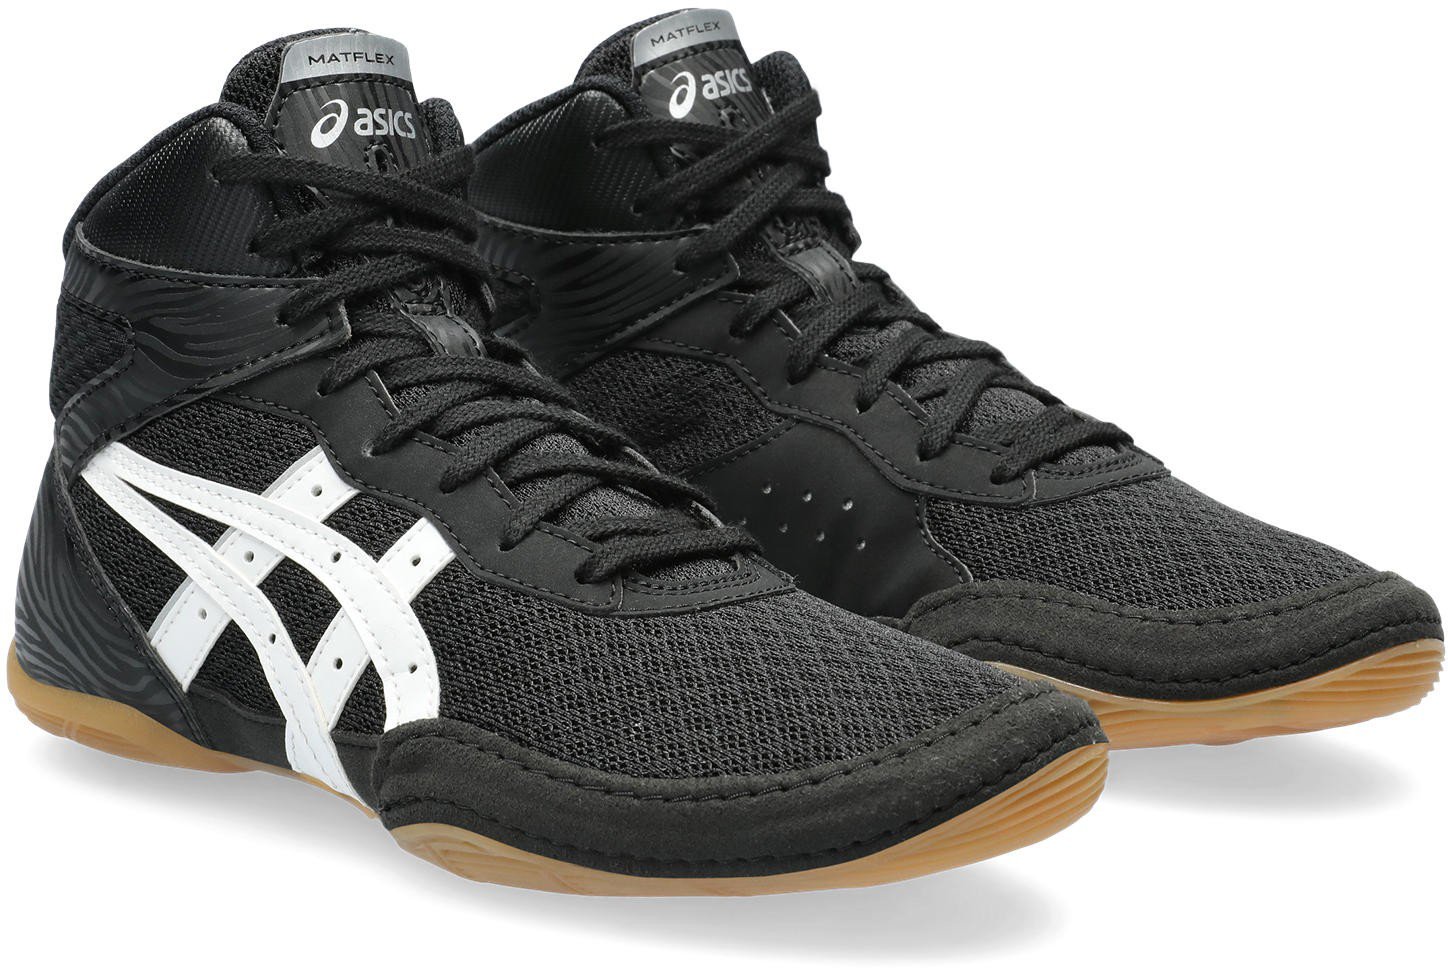 ASICS Youth Matflex 7 Wrestling Shoes | Free Shipping at Academy